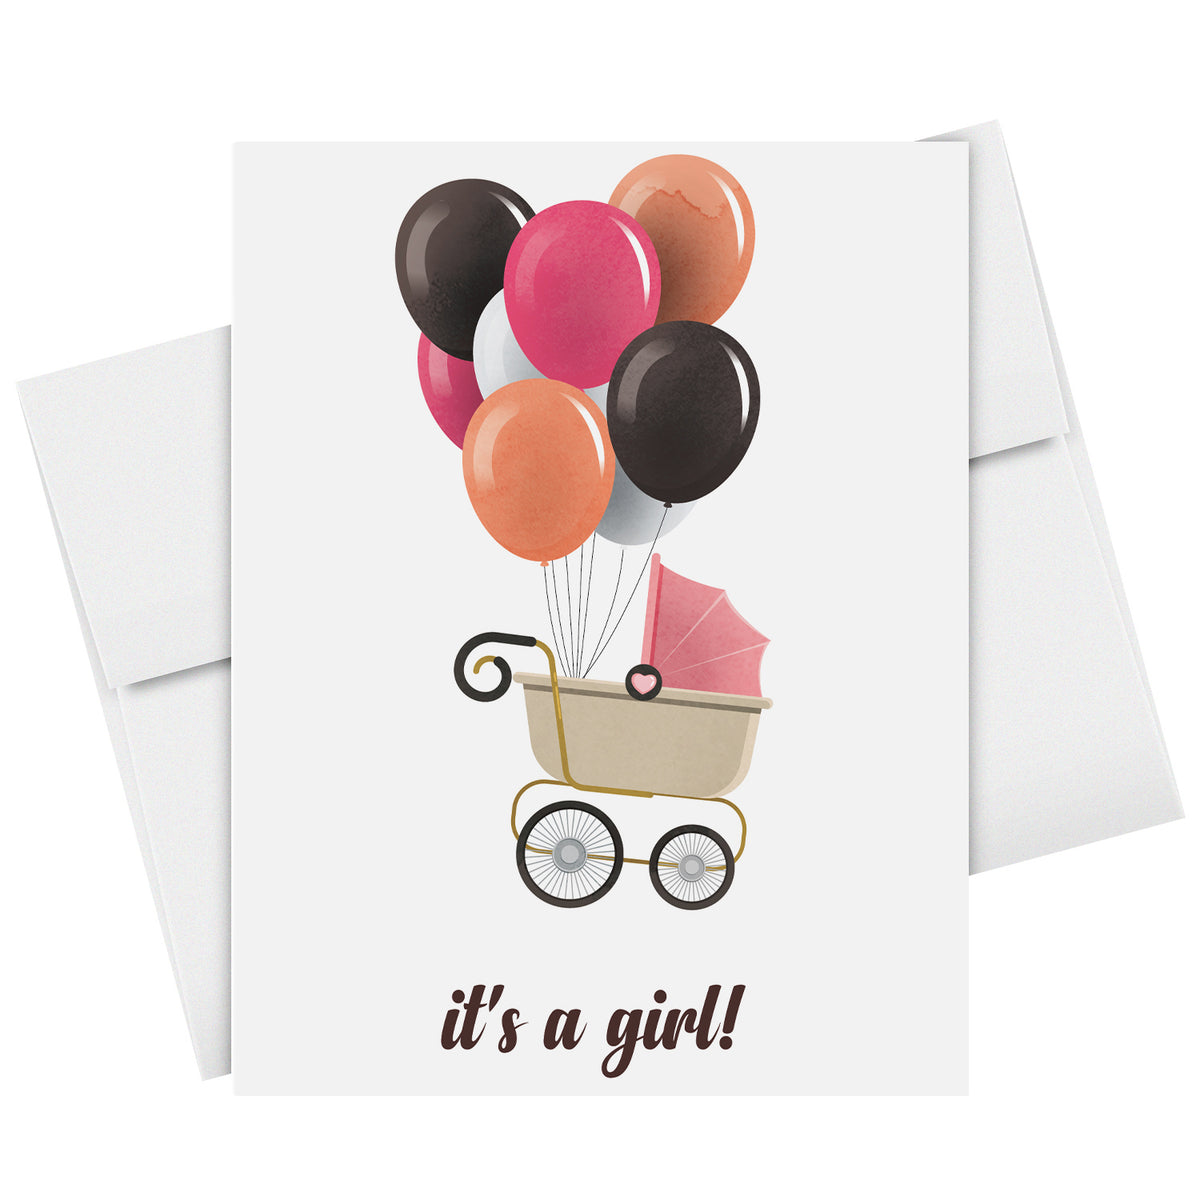 It's A Girl! – Pink Stroller & Balloons – Baby Shower Greeting Cards for New Mom Dad Parents, Welcome New Baby, Congrats, Gender Reveal – 10 per Pack